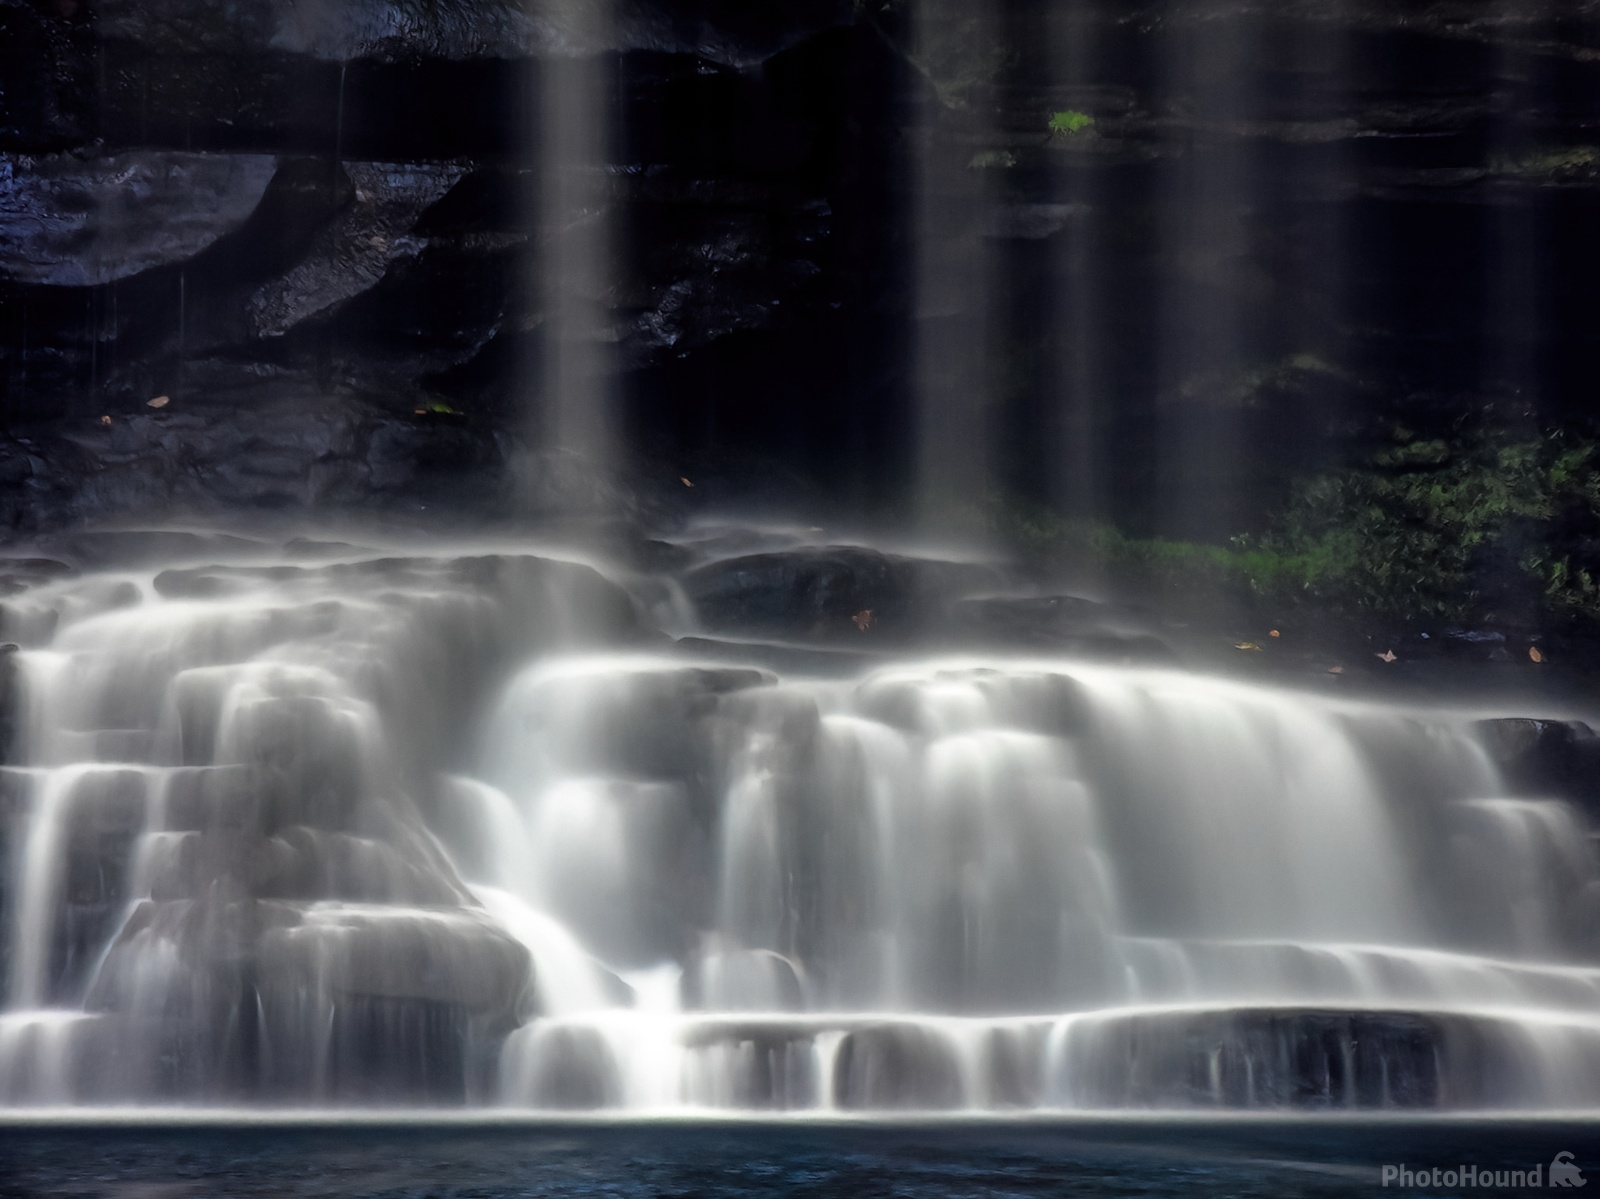 Image of Ricketts Glen State Park by Charley Corace